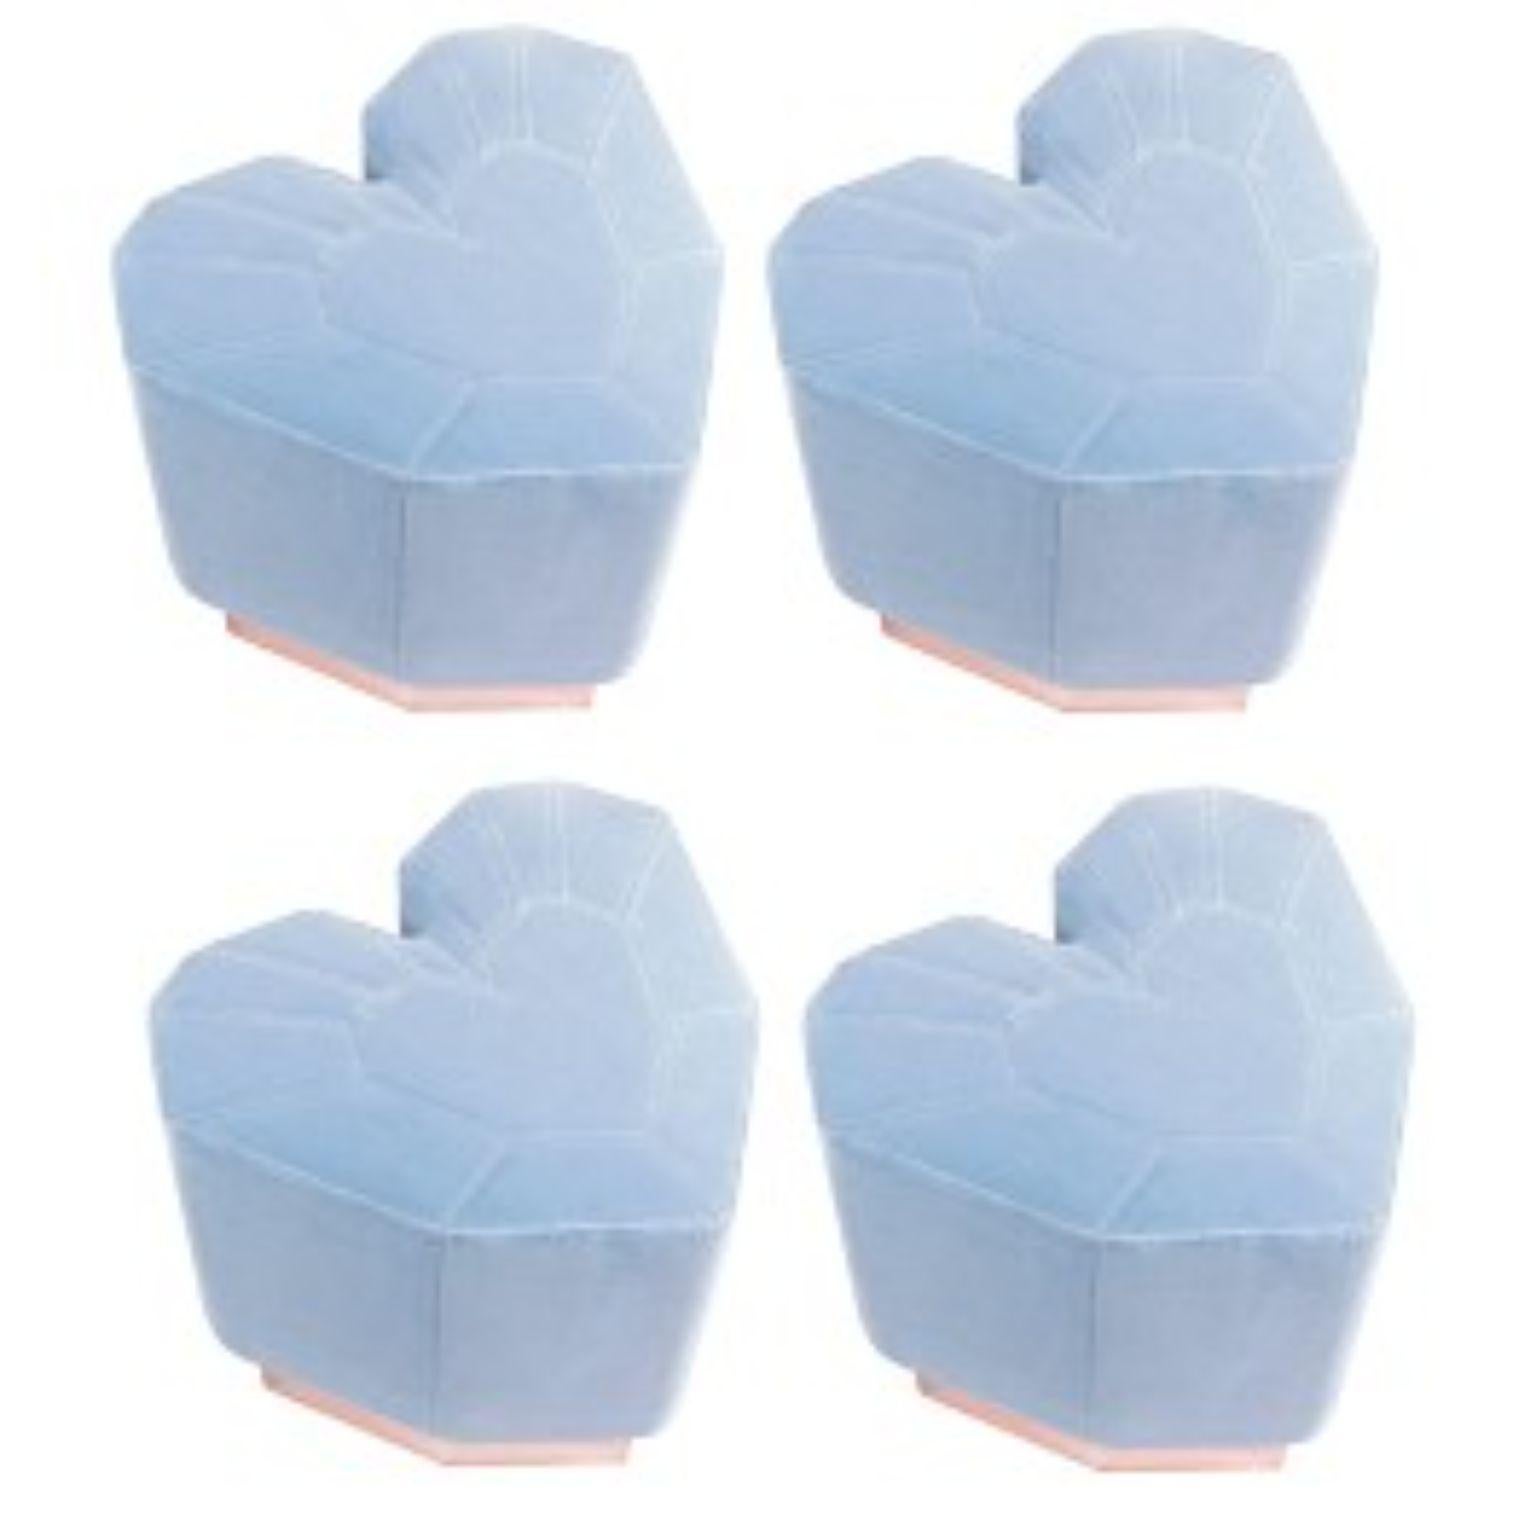 Set of 4 light blue queen heart stools by Royal Stranger
Dimensions: 46 x 49 x 43 cm 
Different upholstery colors and finishes are available. Brass, Copper or Stainless Steel in polished or brushed finish.
Materials: Velvet heart shape upholstery